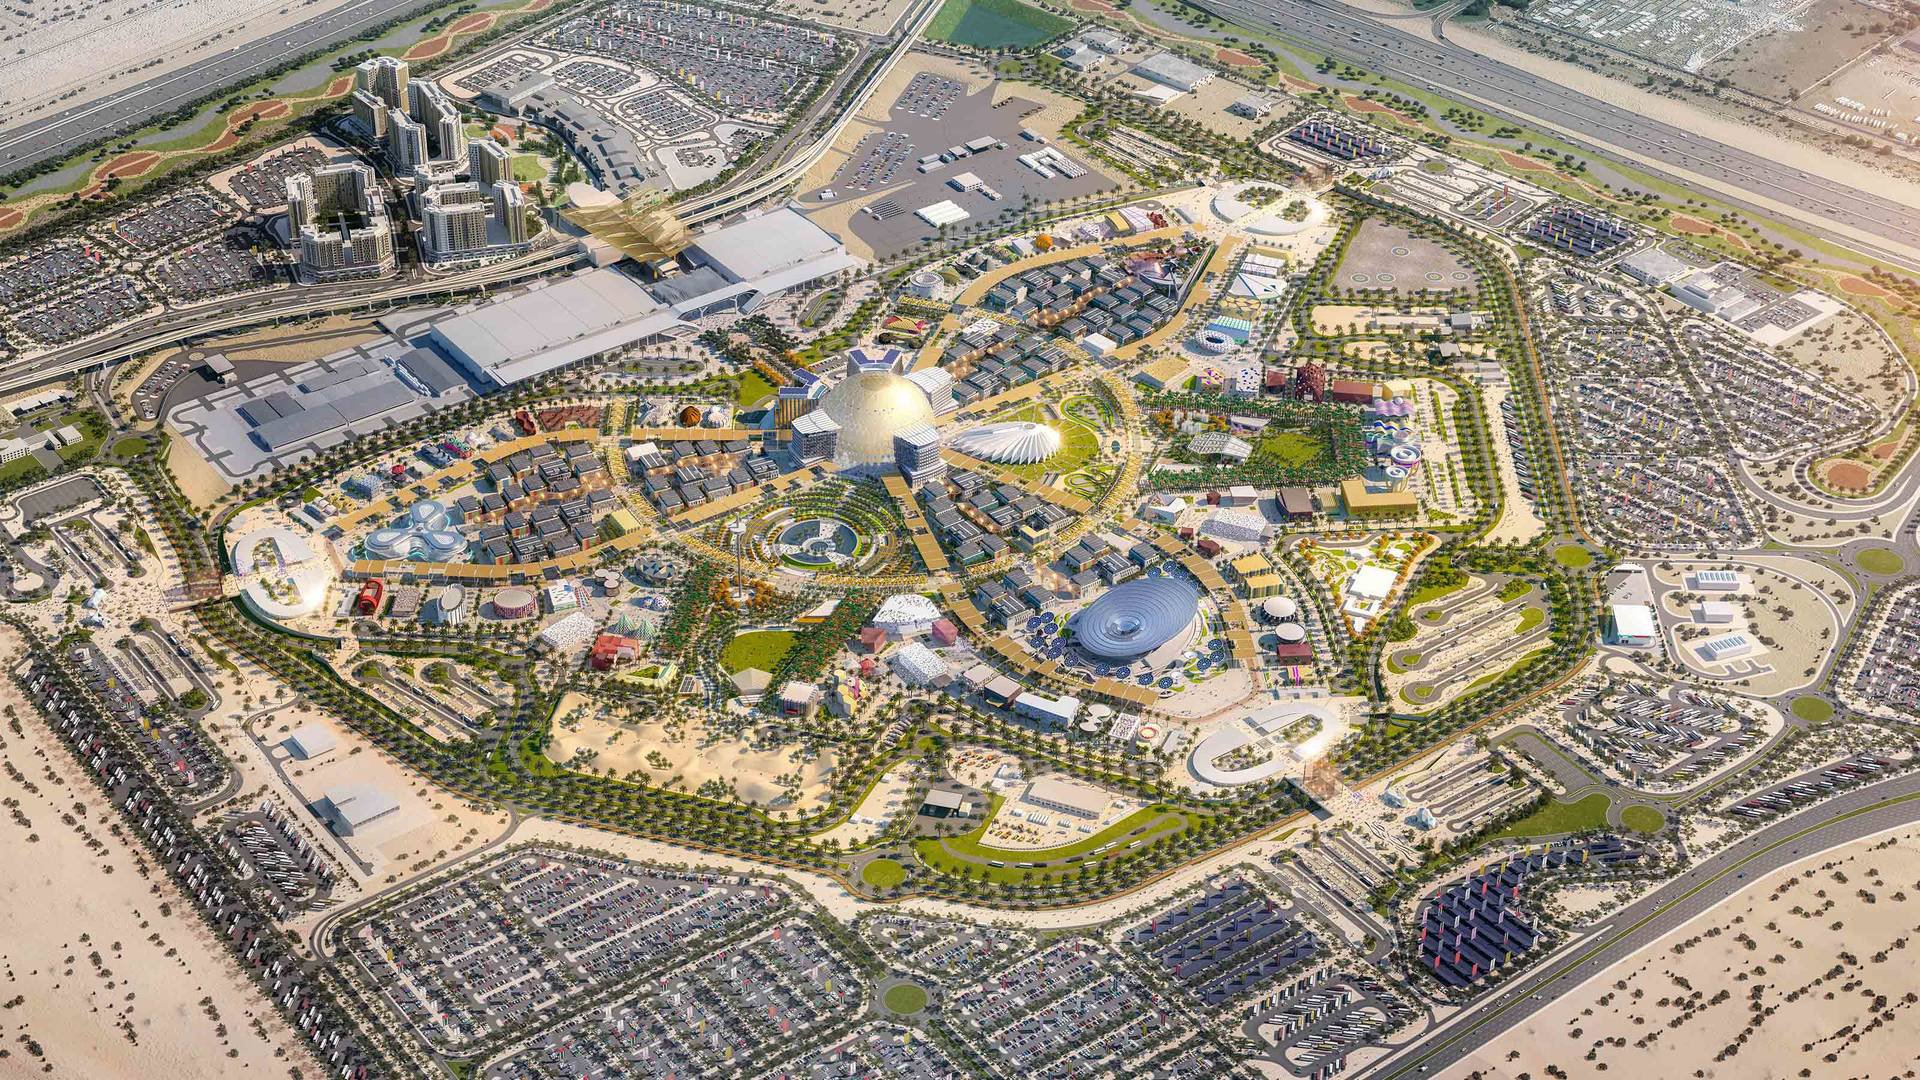 Dubai Discloses Green and Sustainable Plans for Expo 2020